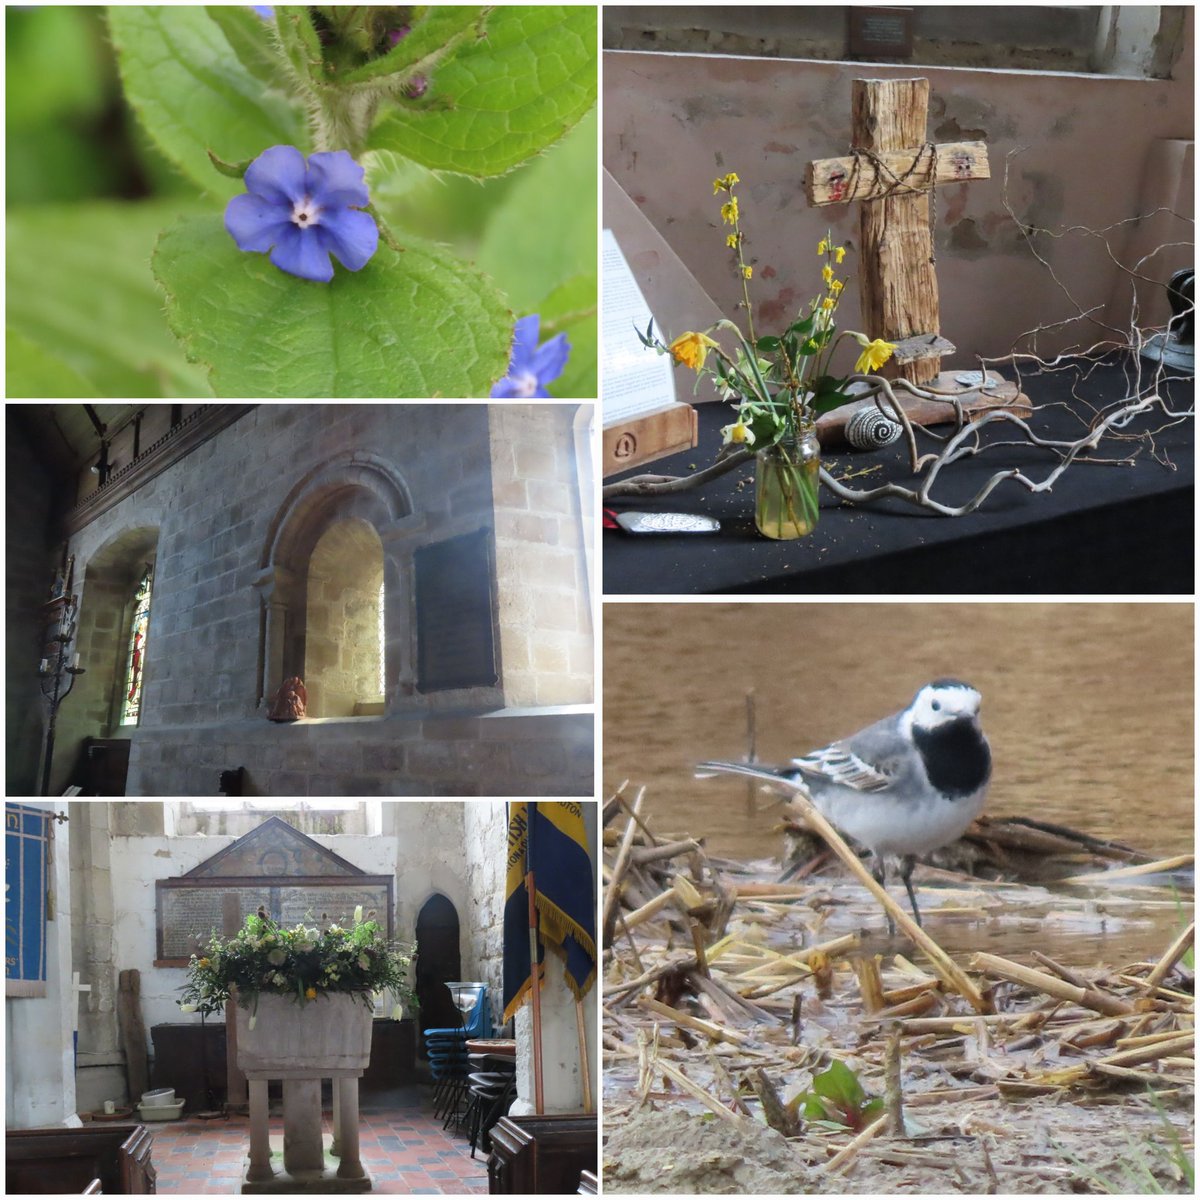 Really enjoyable stroll around Coton Nature reserve this morning and the village. So pleased to find St Peter's Church open with its Norman windows and 12th century font - all dressed beautifully for Easter. #achurchnearyou @CambridgePPF